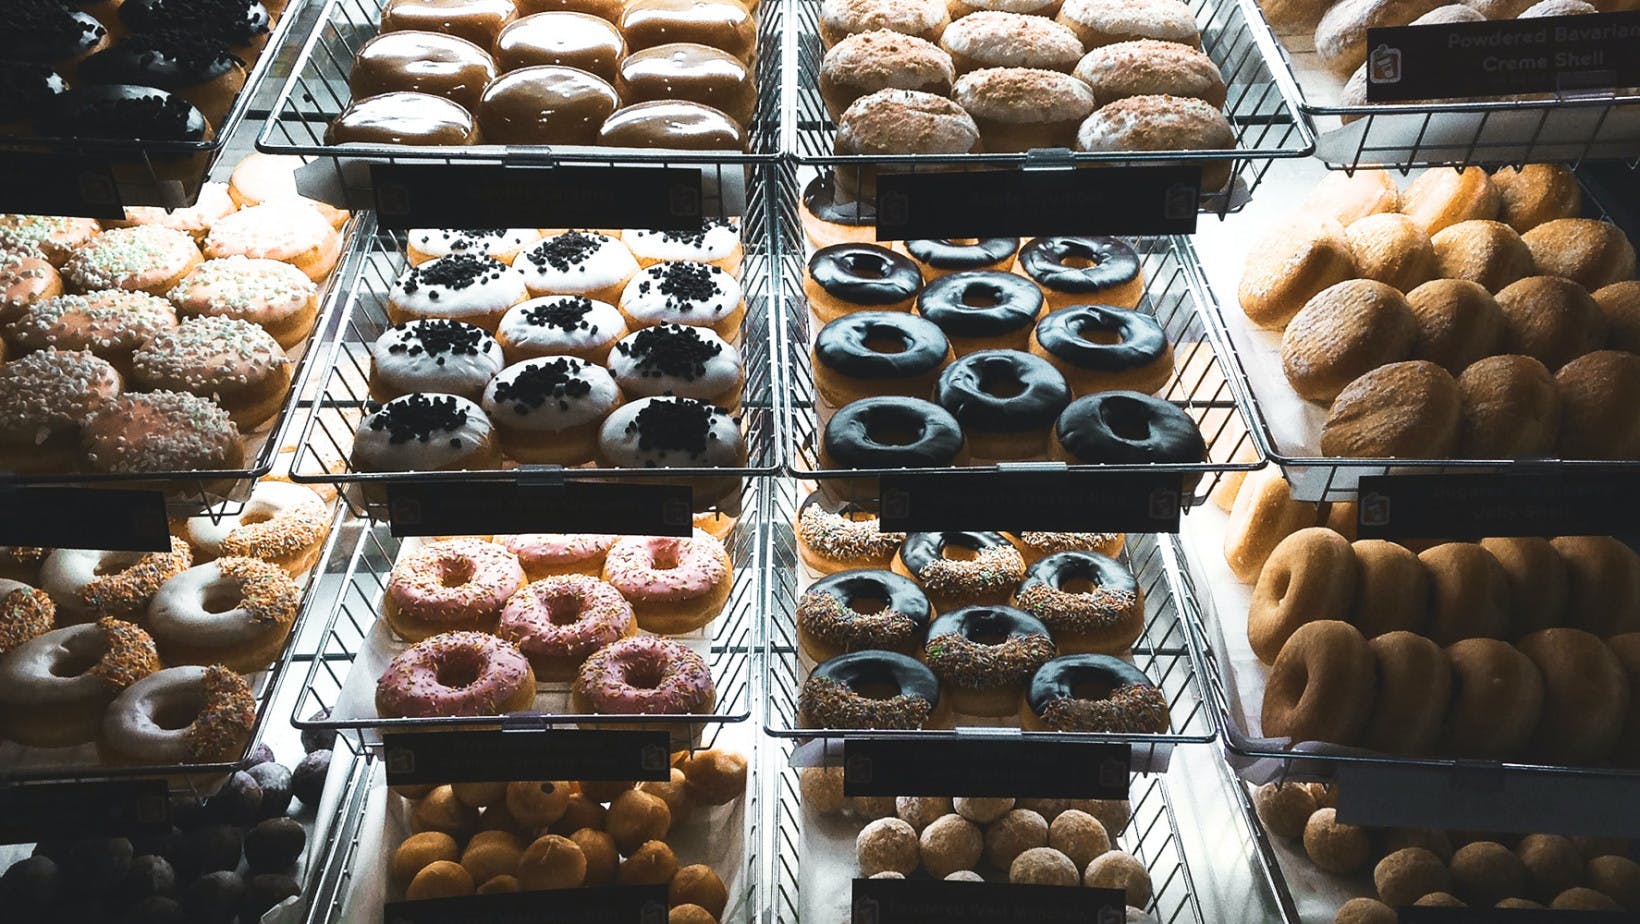 Trays of donuts on shelf in a bakery. 